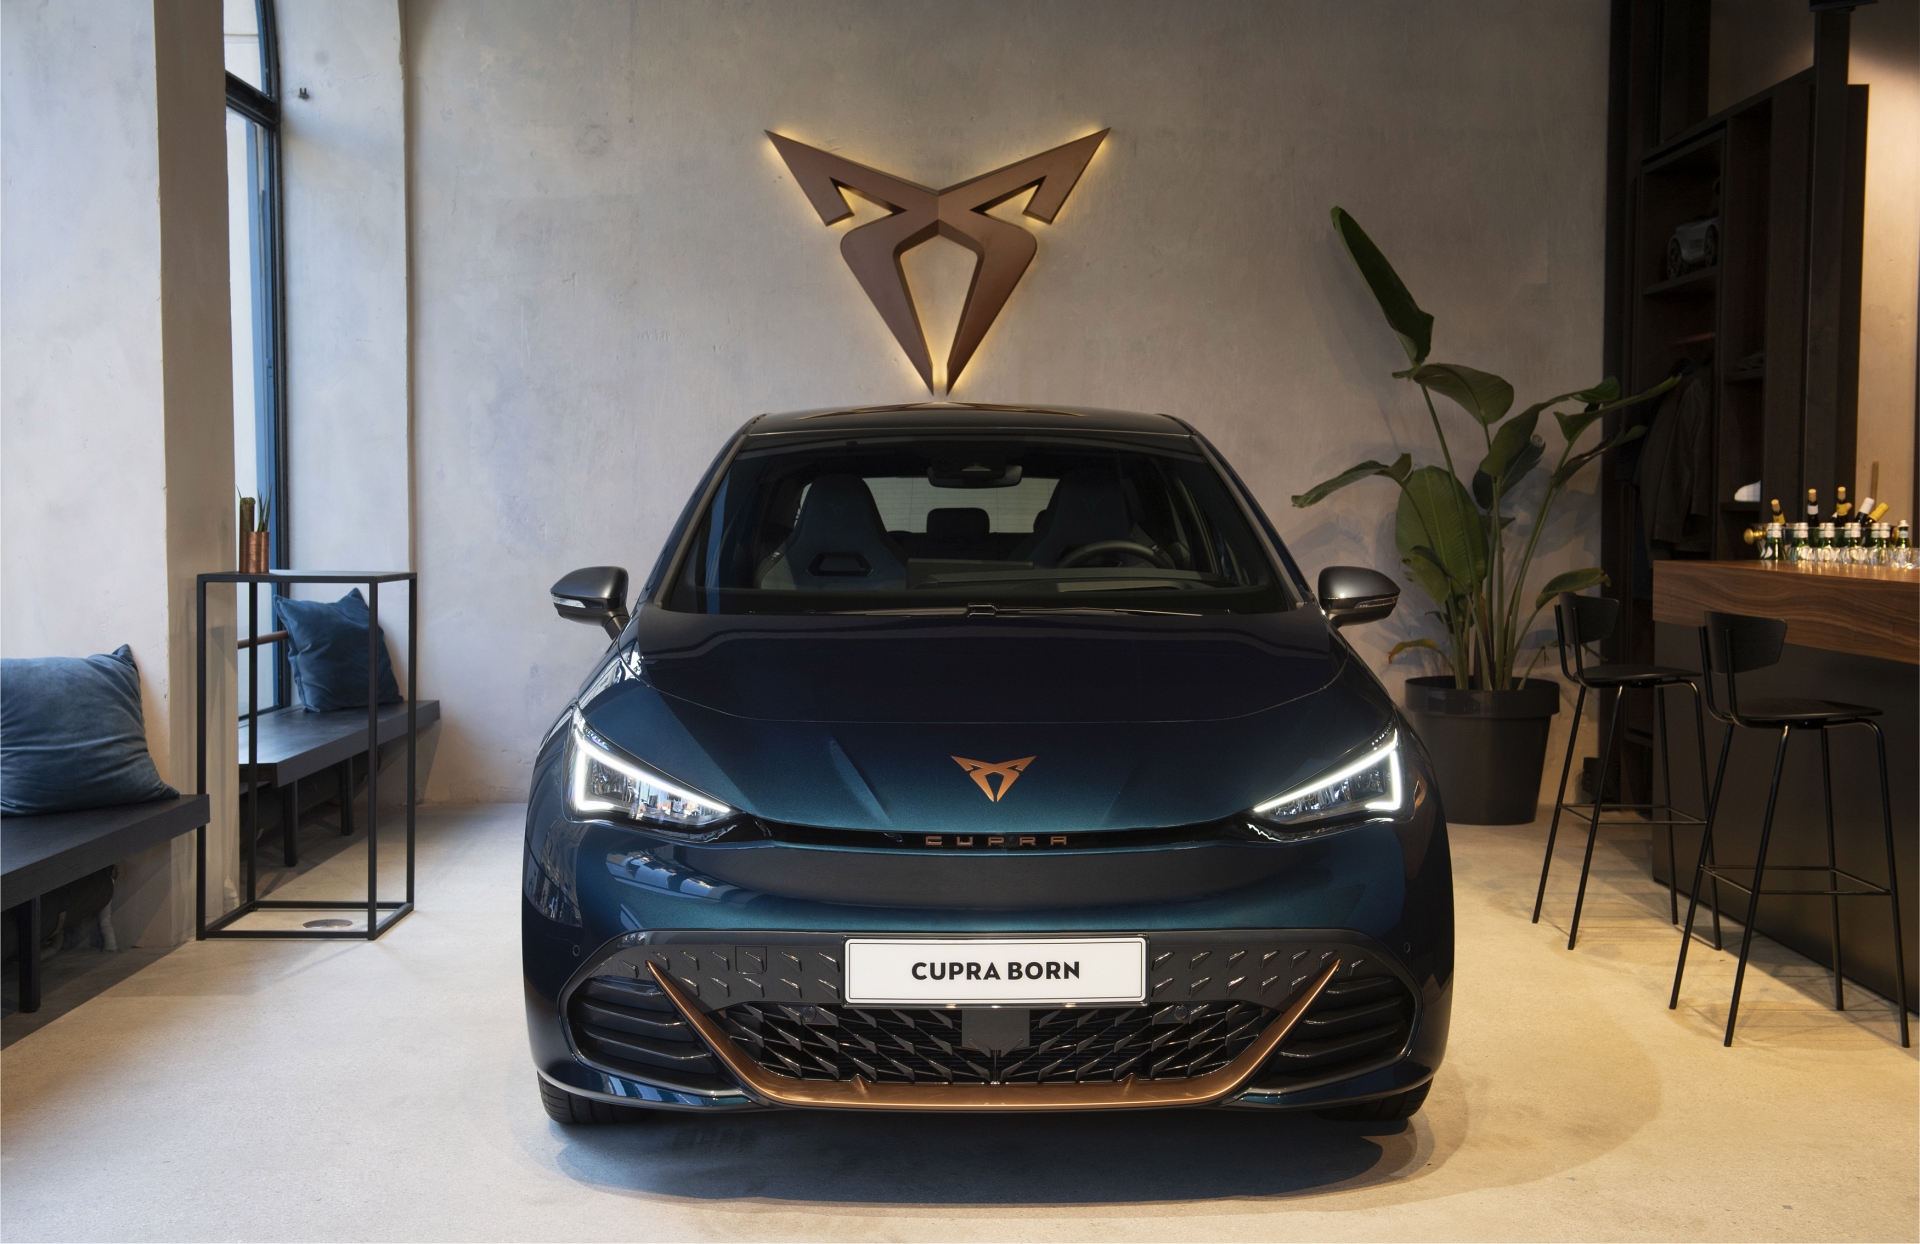 CUPRA-moves-forward-with-its-ambition-to-become-a-fully-electric-brand-by-2030_01_HQ